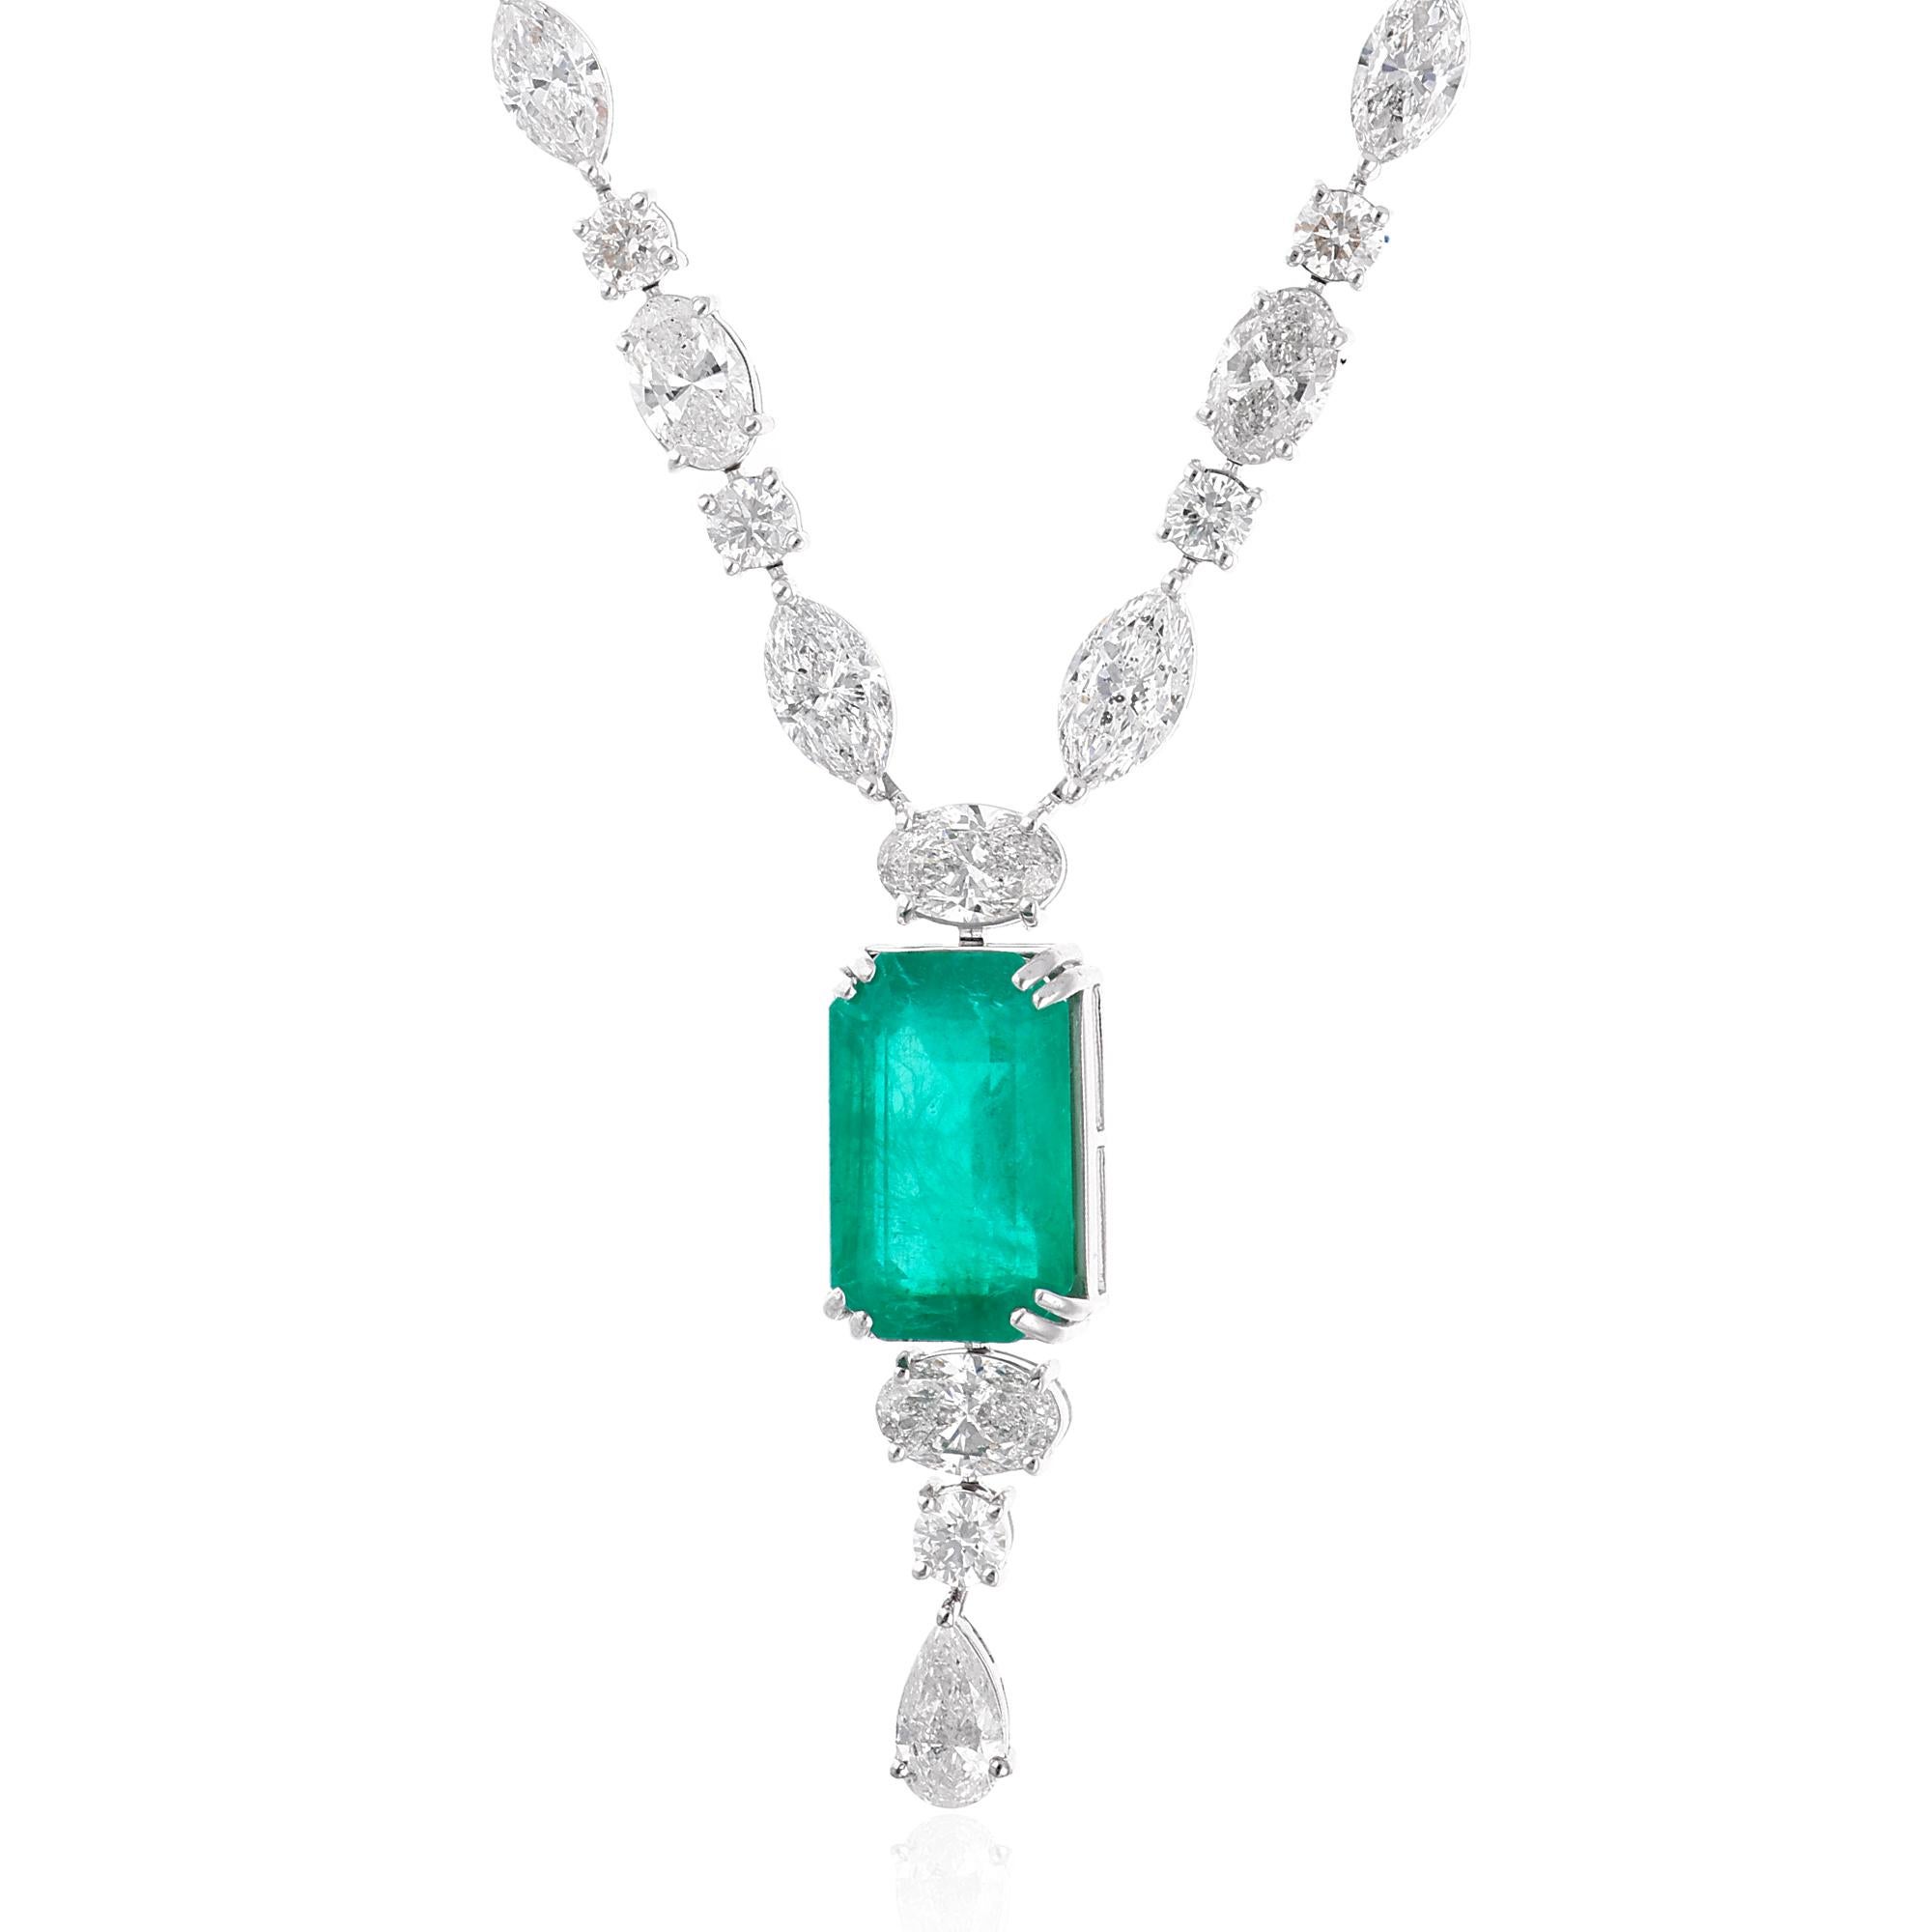 Add a touch of natural beauty and sophistication to your jewelry collection with this exquisite Natural Emerald Gemstone Necklace. Handmade with meticulous craftsmanship, this fine jewelry piece features a stunning natural emerald gemstone adorned